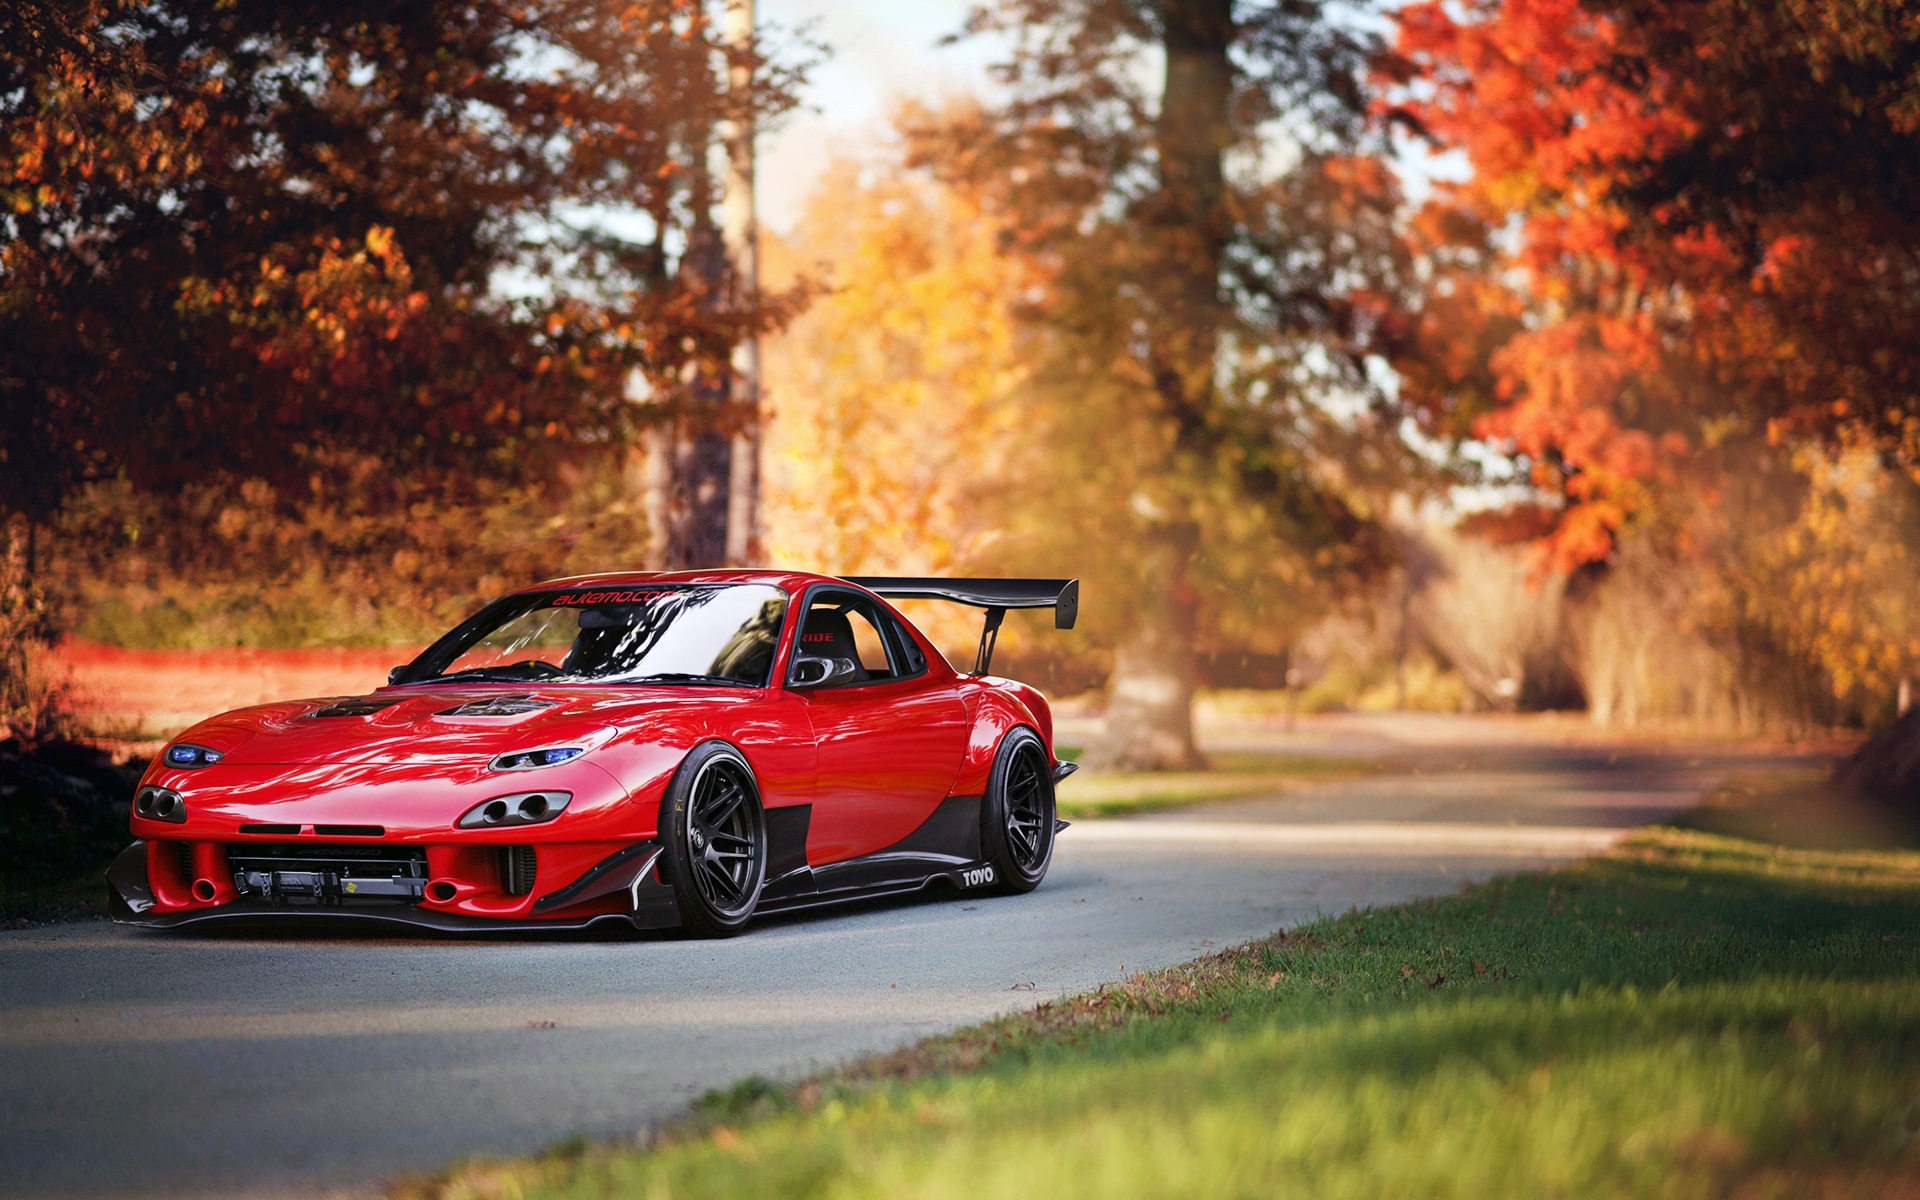 478 Nice Galaxy note 3 car wallpaper autumn rx7 for Wall poster in bedroom